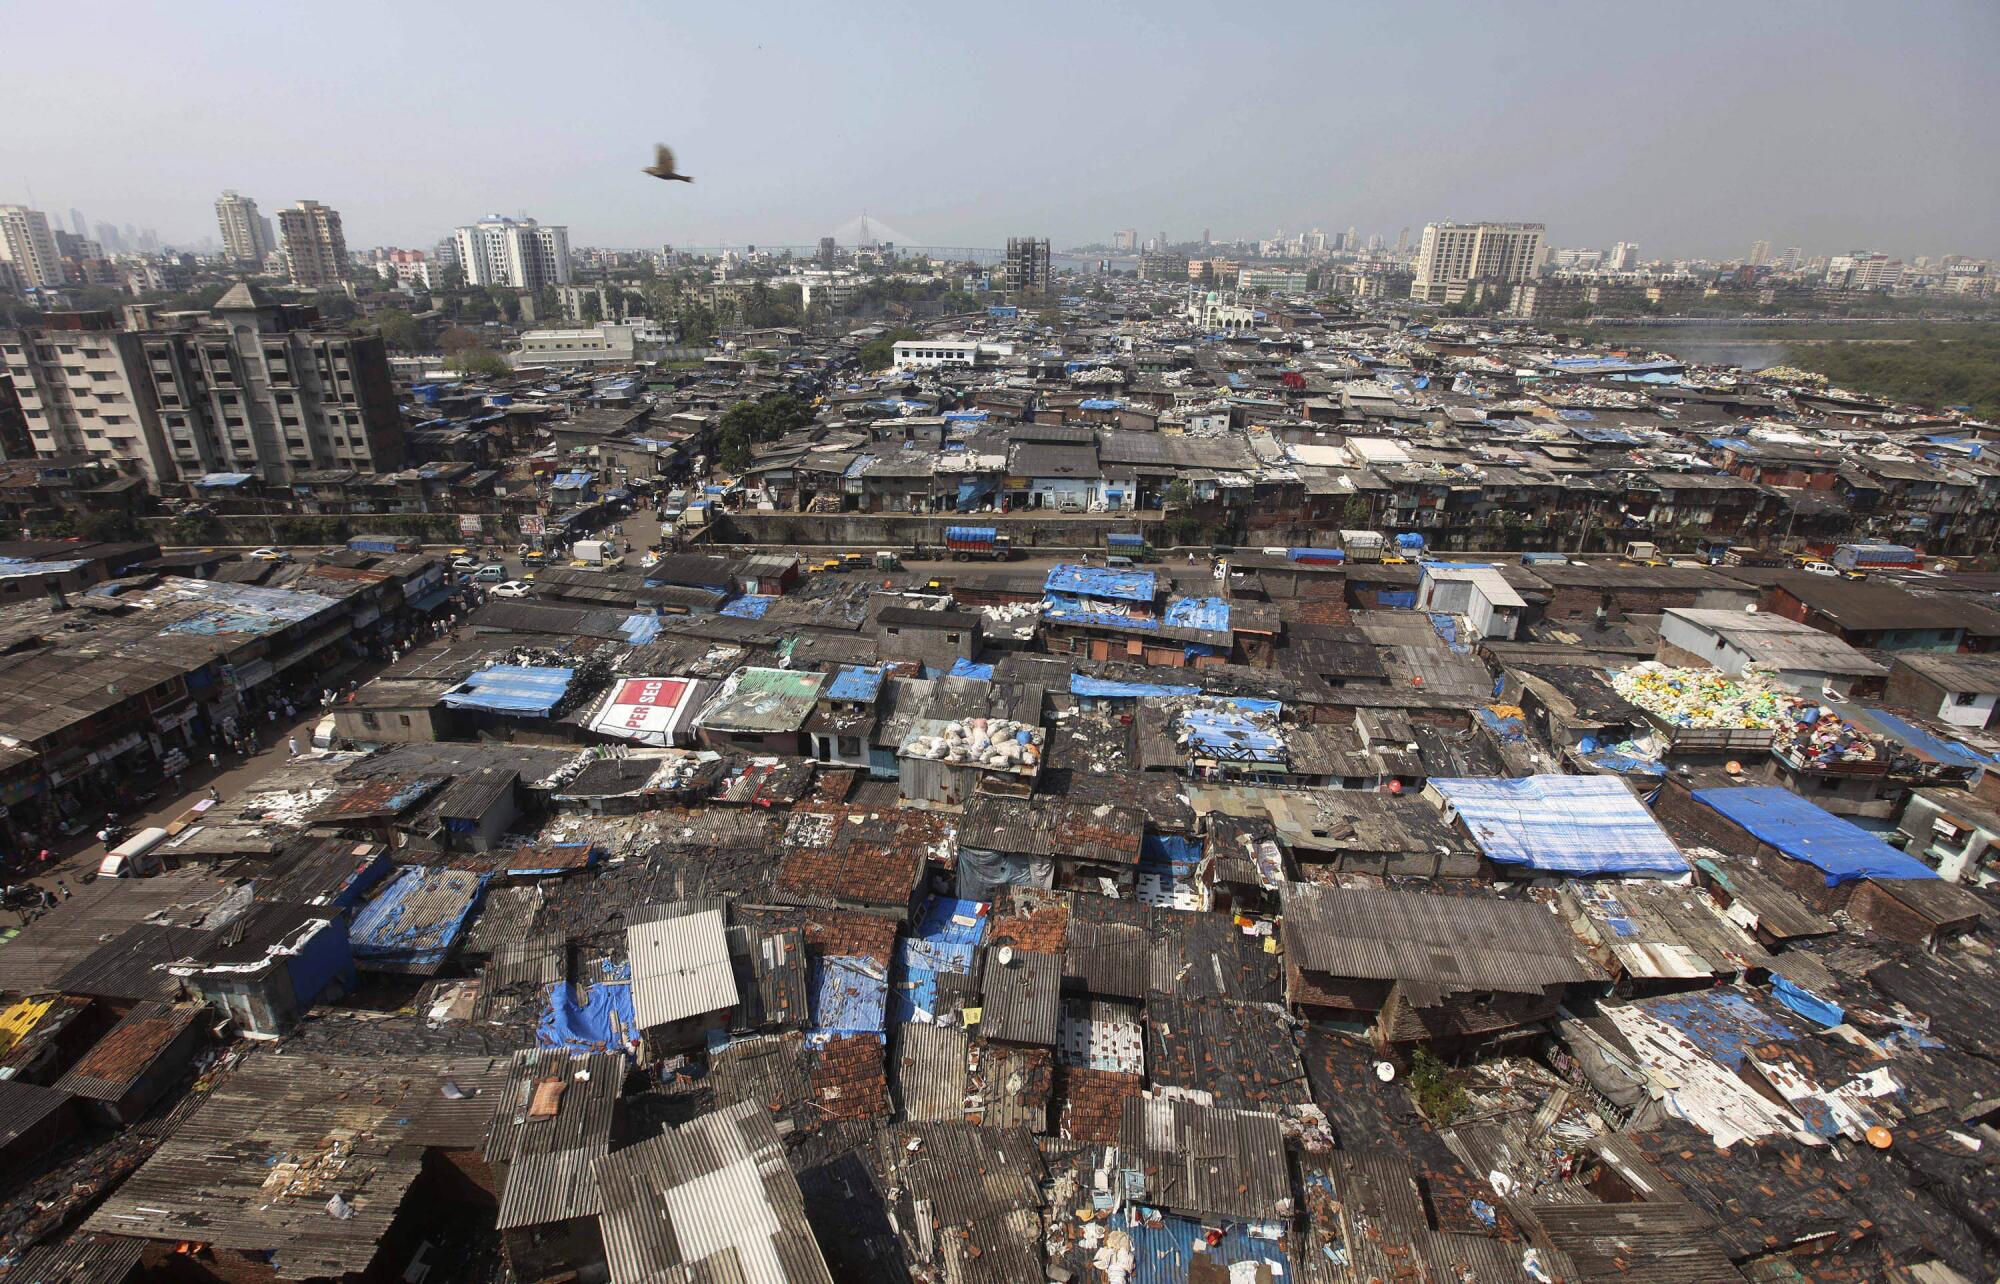 A bird flies over Dharavi, one of Asia's largest slums, in Mumbai, India.